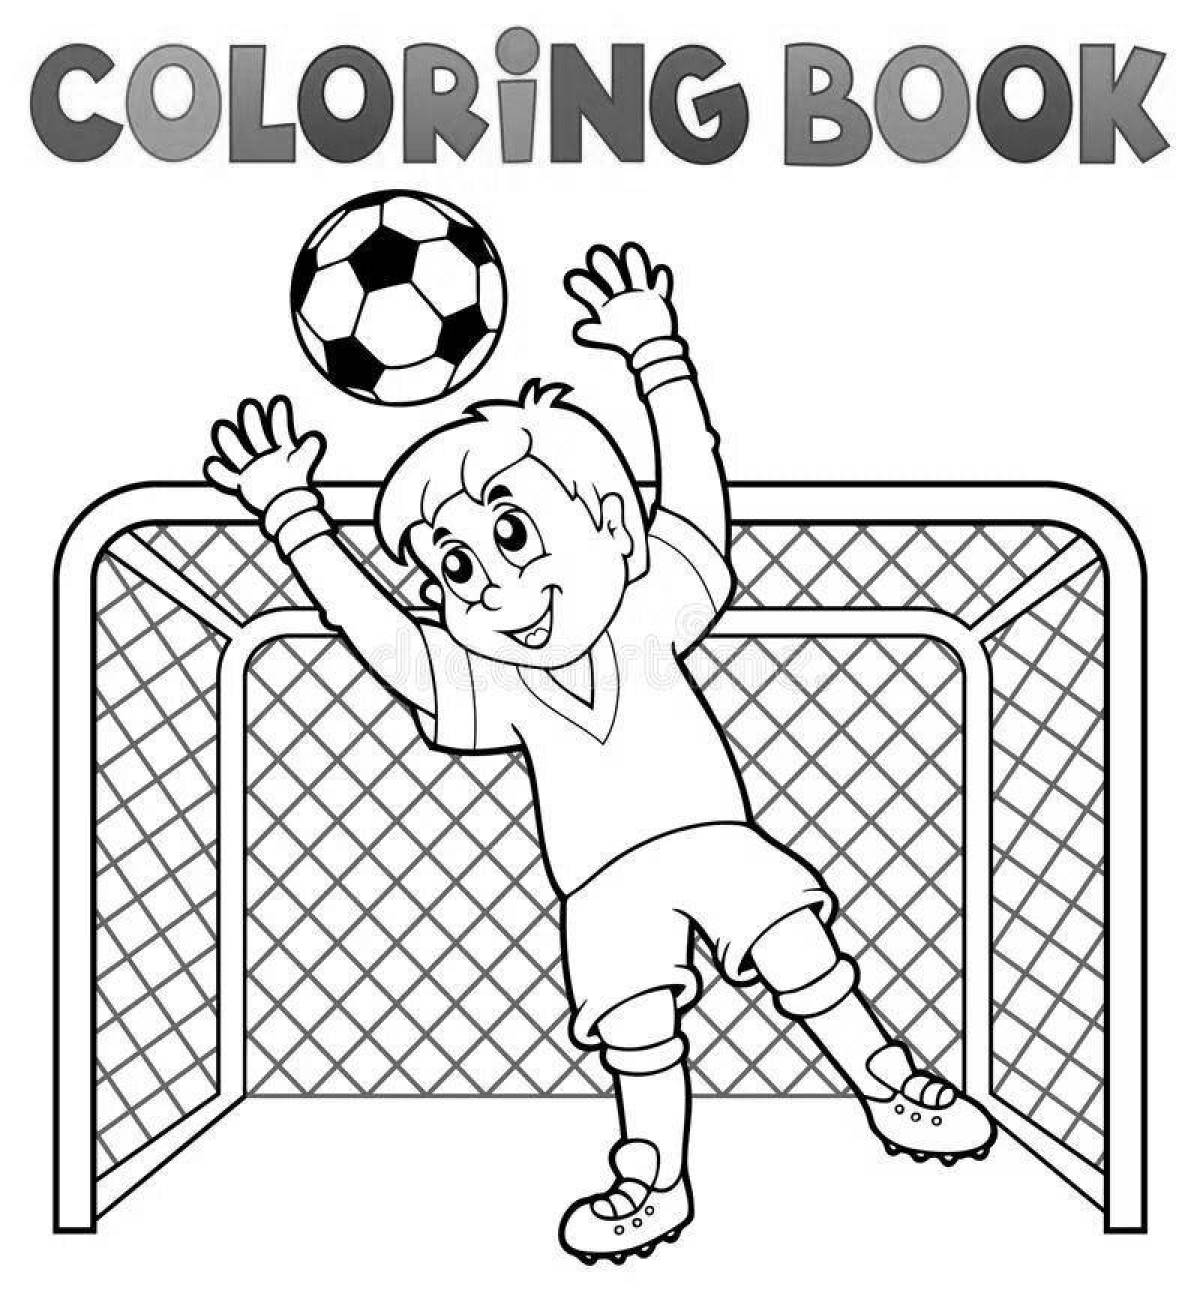 Great football goalkeeper coloring page